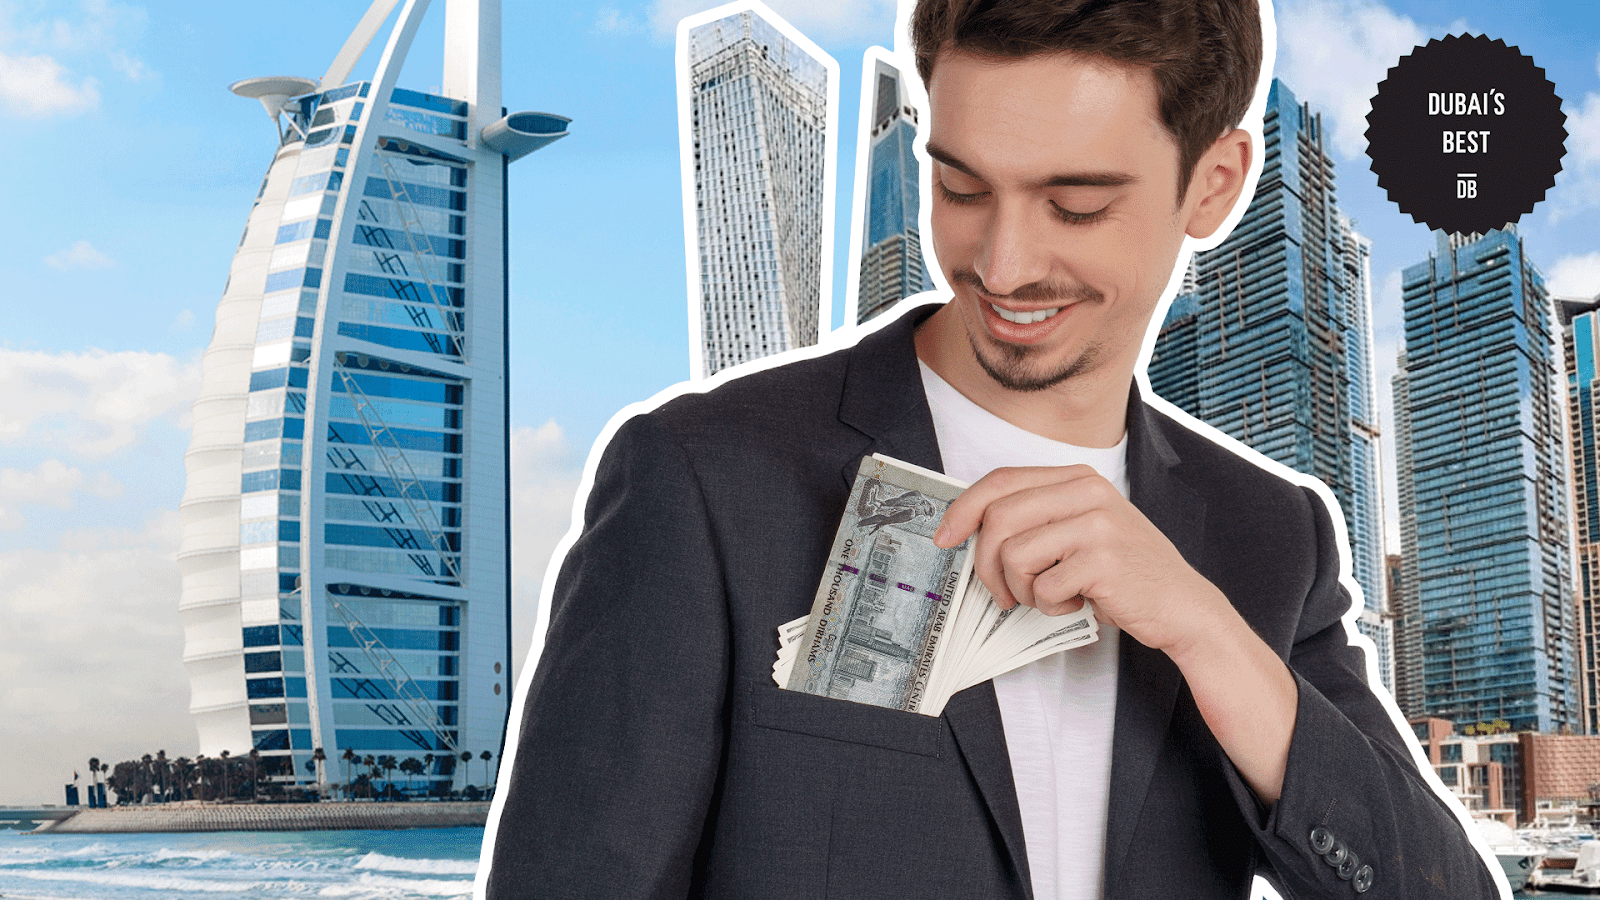 Tips for Tipping in Dubai